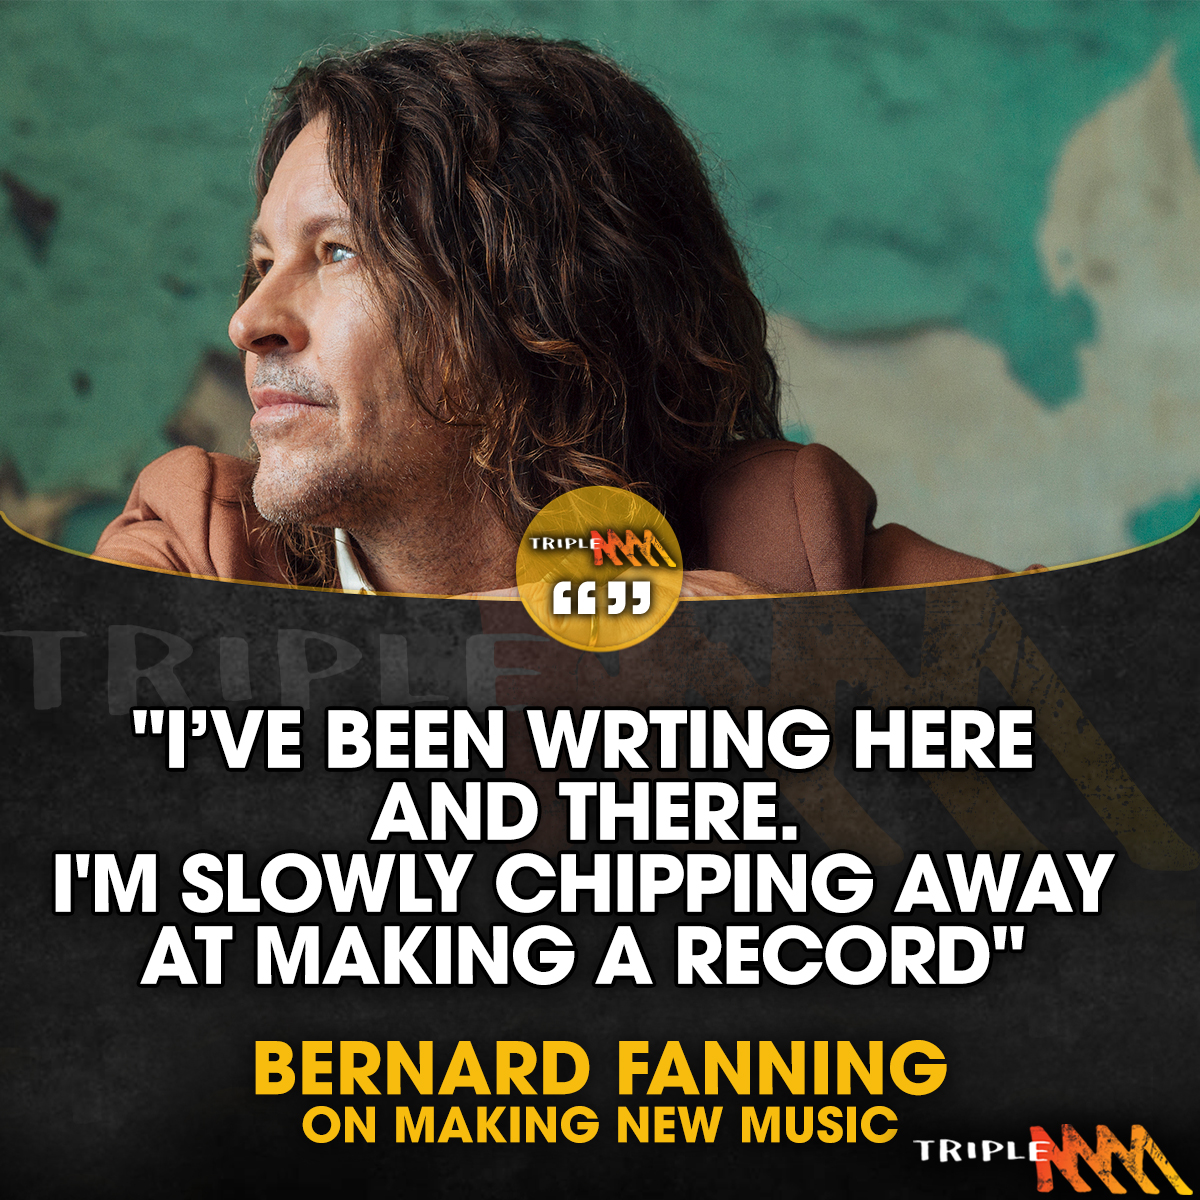 "I'm slowly chipping away at making a record" - Bernard Fanning's working on new material.